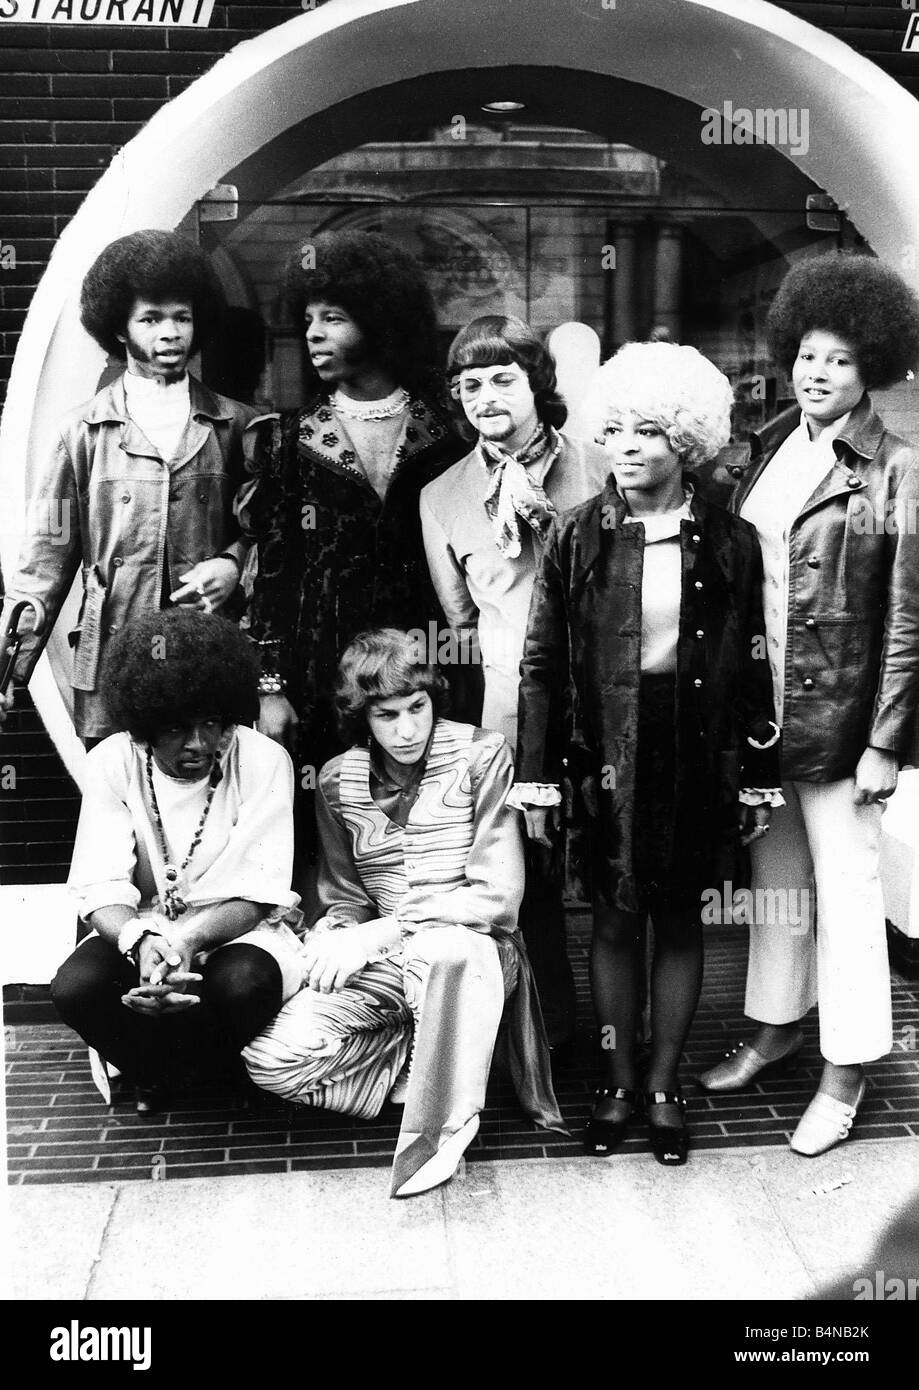 Sly and the Family Stone pop group 1968 Stock Photo